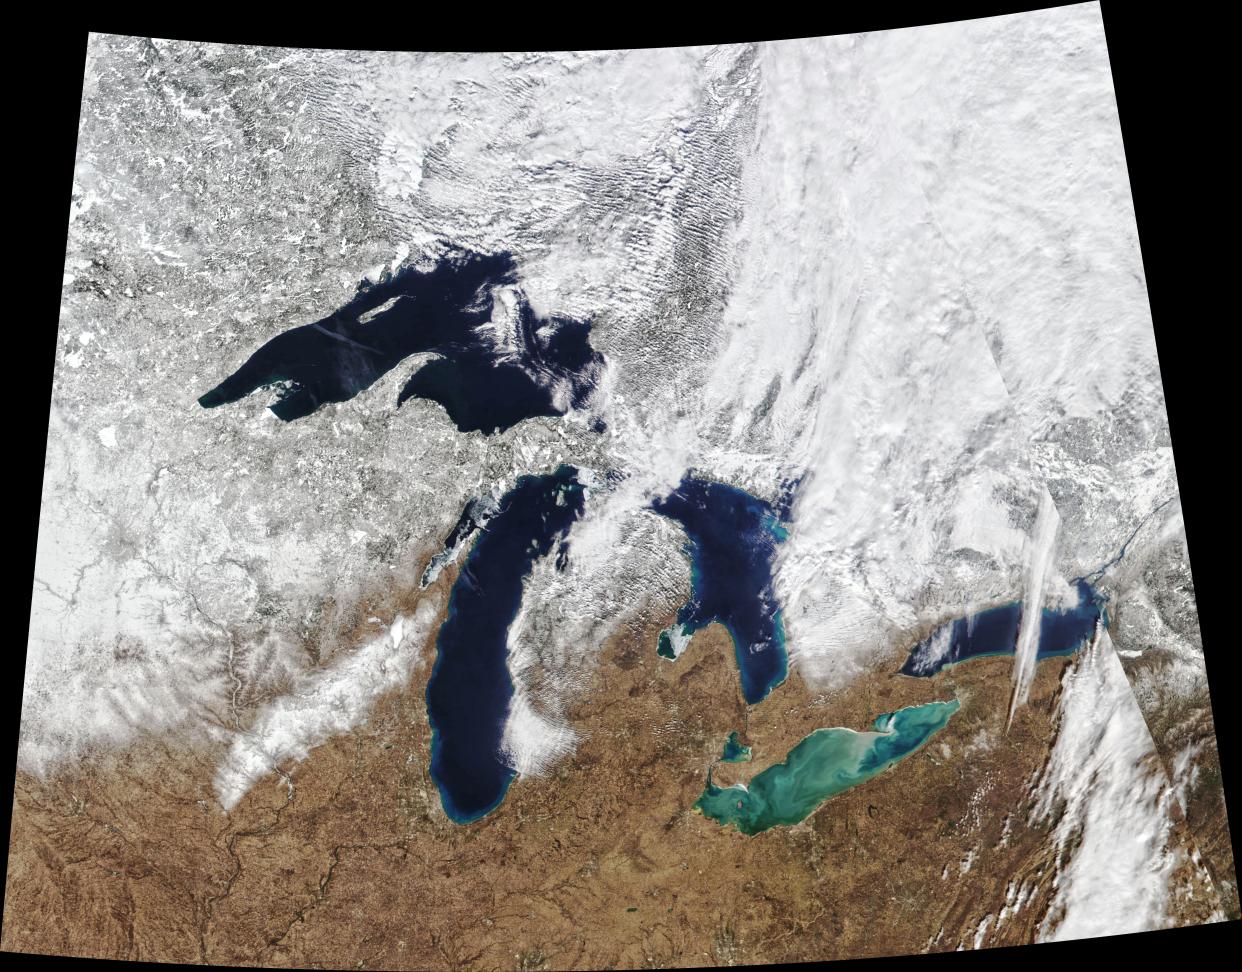 The hottest year on record meant ice coverage on the Great Lakes was low in 2023. Ice coverage in this February 2023 NASA image was only 6.6 percent in the five lakes, compared to an average of 35-40 percent ice cover typical for mid-February.